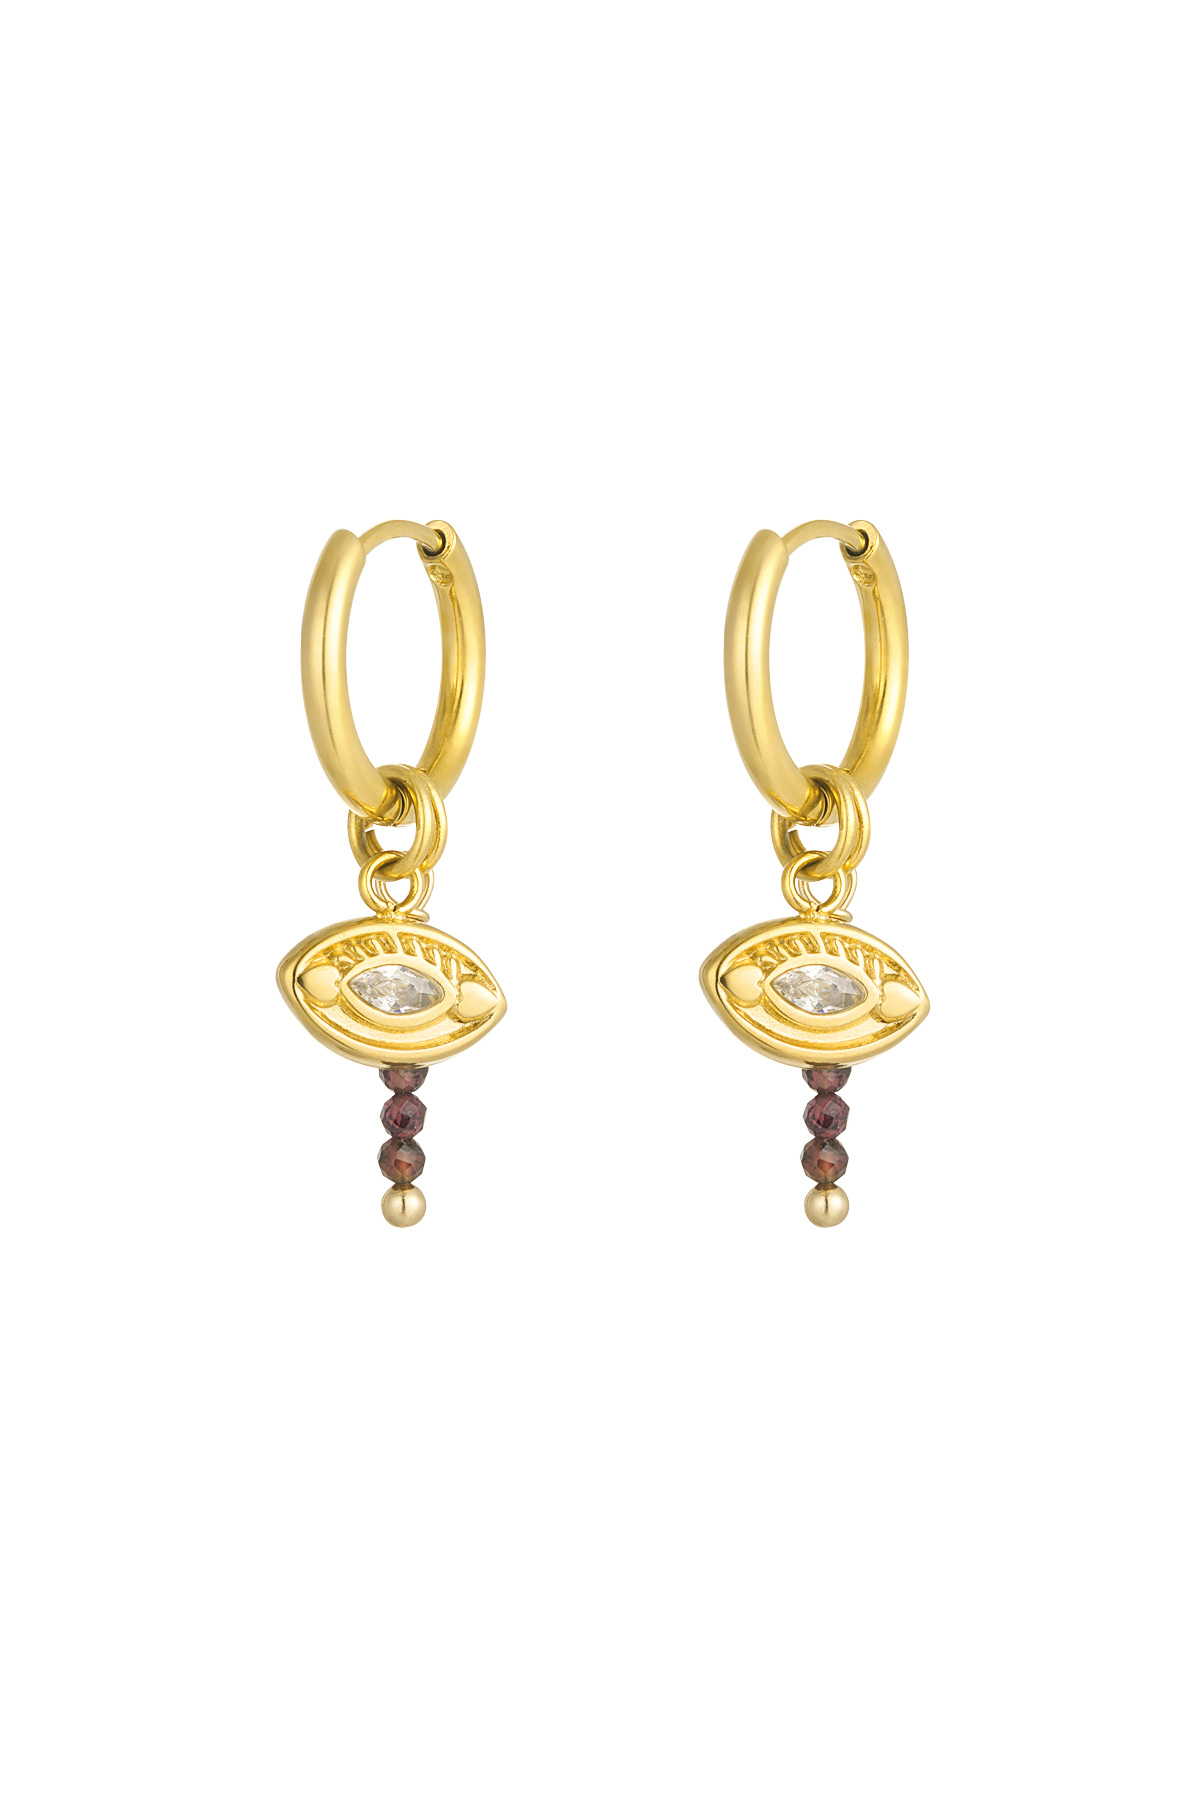 Eye earrings with beads - gold/brown h5 